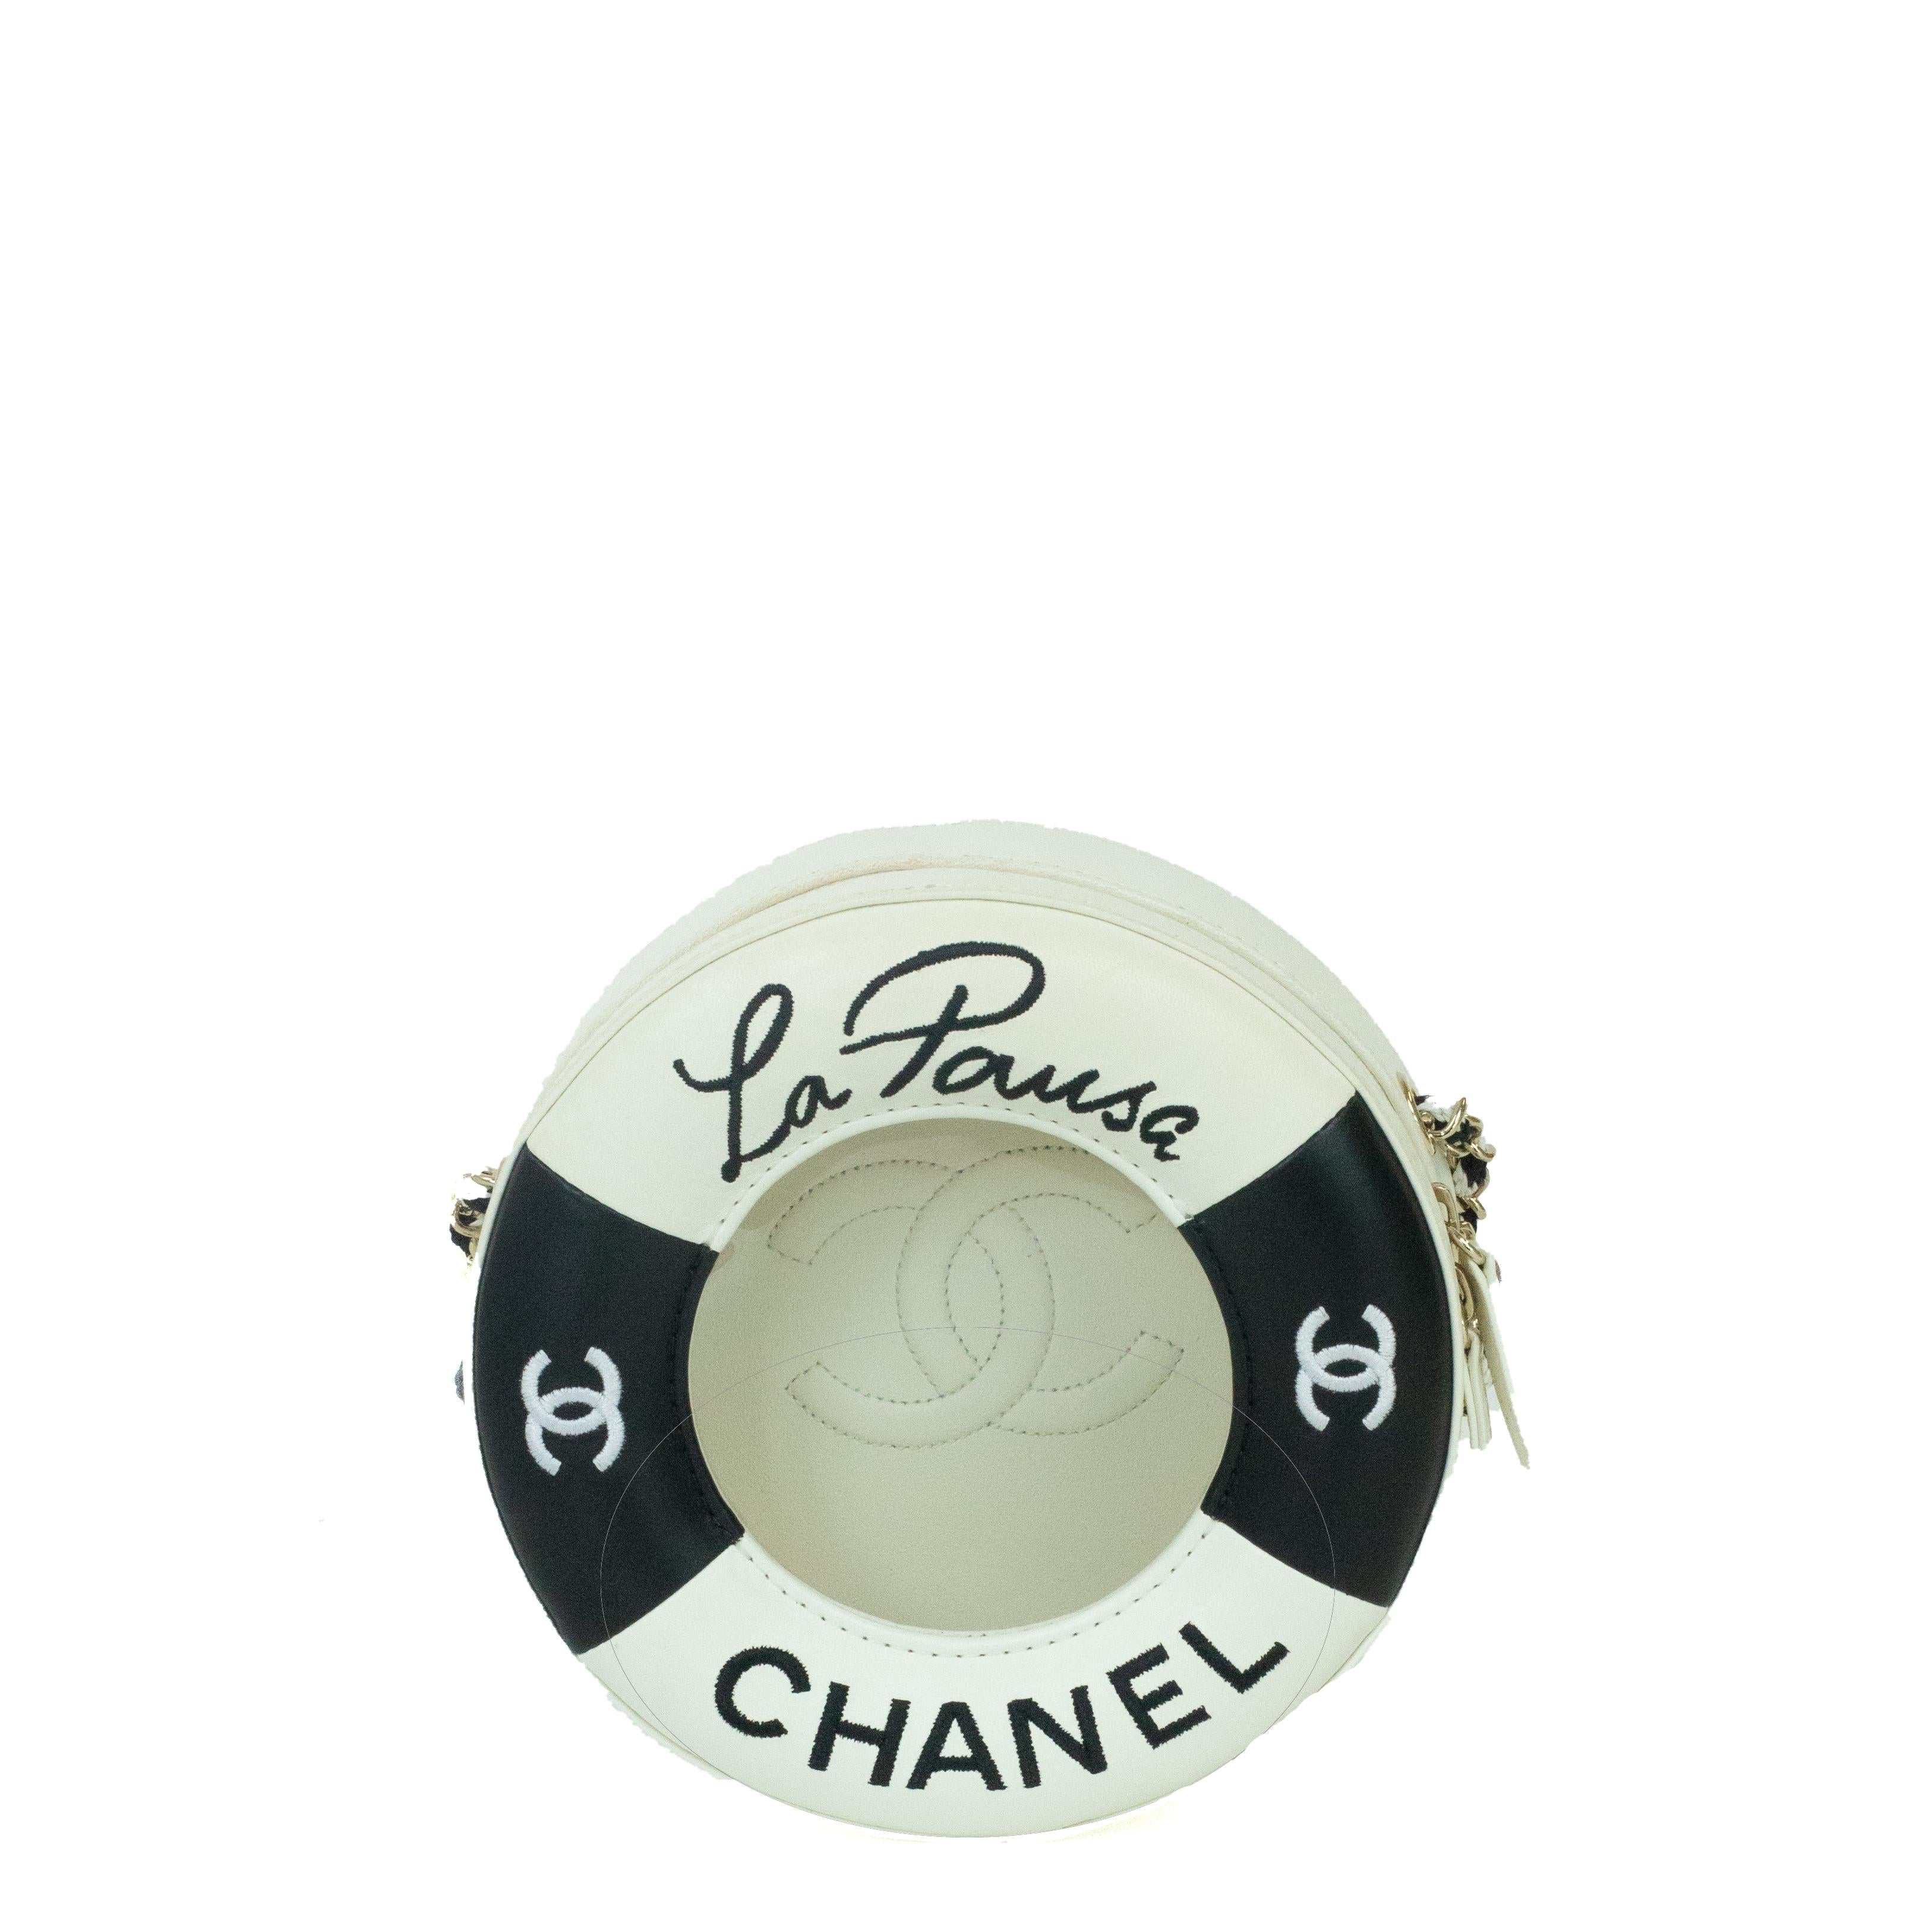 - Designer: CHANEL
- Model: La pausa
- Condition: Very good condition. Sign of wear on Leather
- Accessories: Dustbag, Authenticity Card
- Measurements: Width: 17cm, Height: 17cm , Depth: 6cm , Strap: 125cm 
- Exterior Material: Leather
- Exterior